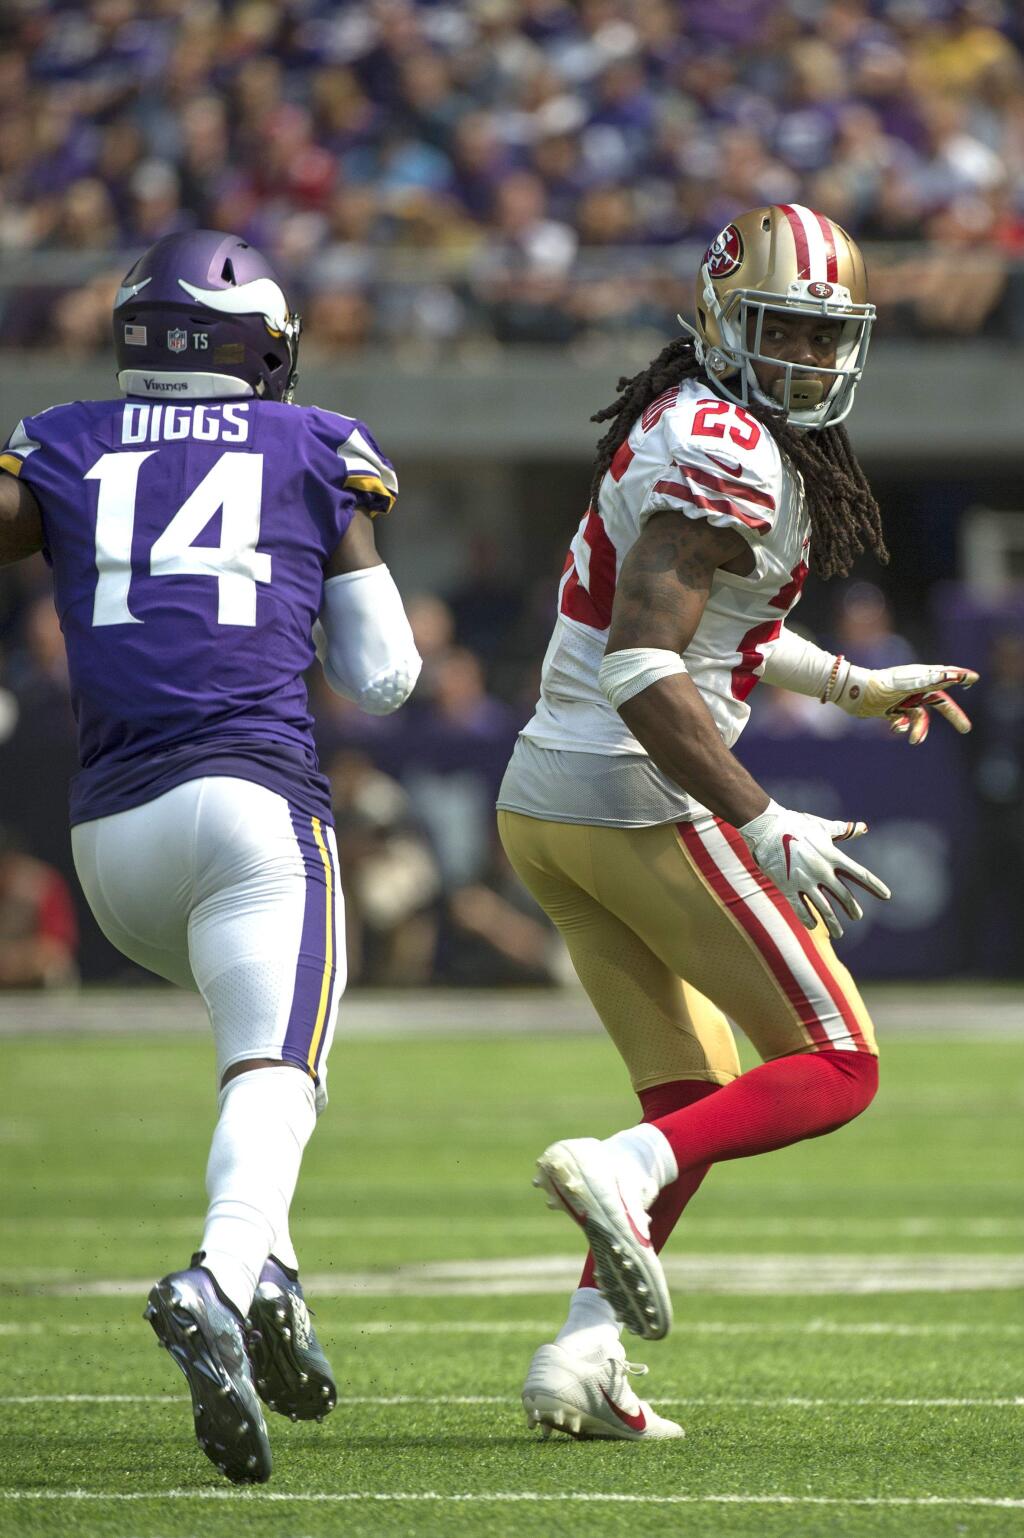 The San Francisco 49ers' Richard Sherman during a game against the Minnesota Vikings on Sunday, Sept. 9, 2018, in Minneapolis. (AP Photo/Craig Lassig)